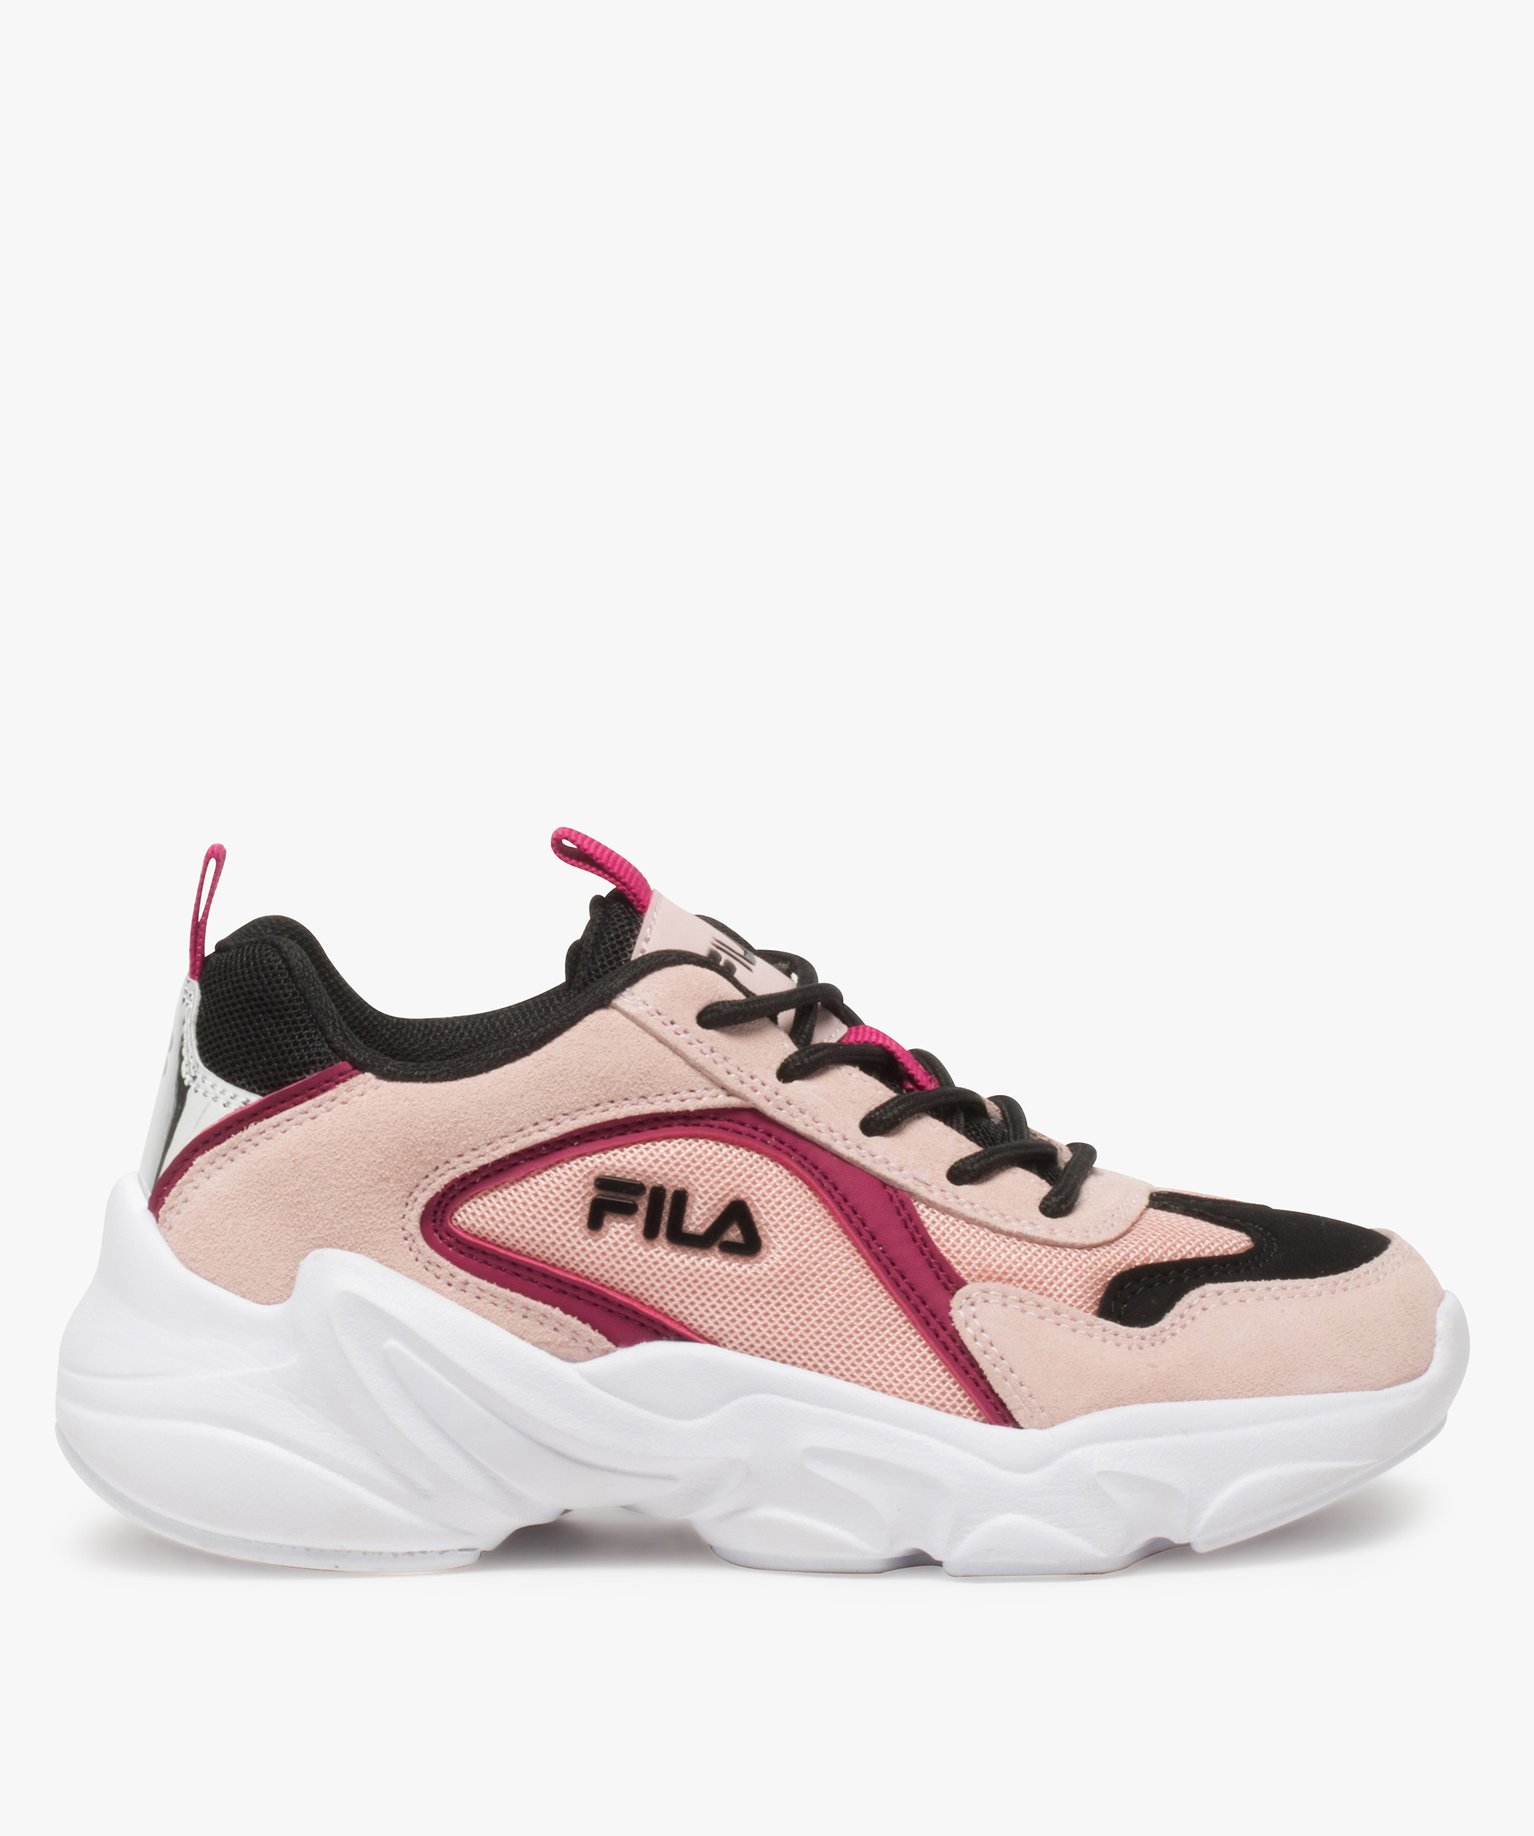 baskets fille running multi-matieres a lacets - fila rose